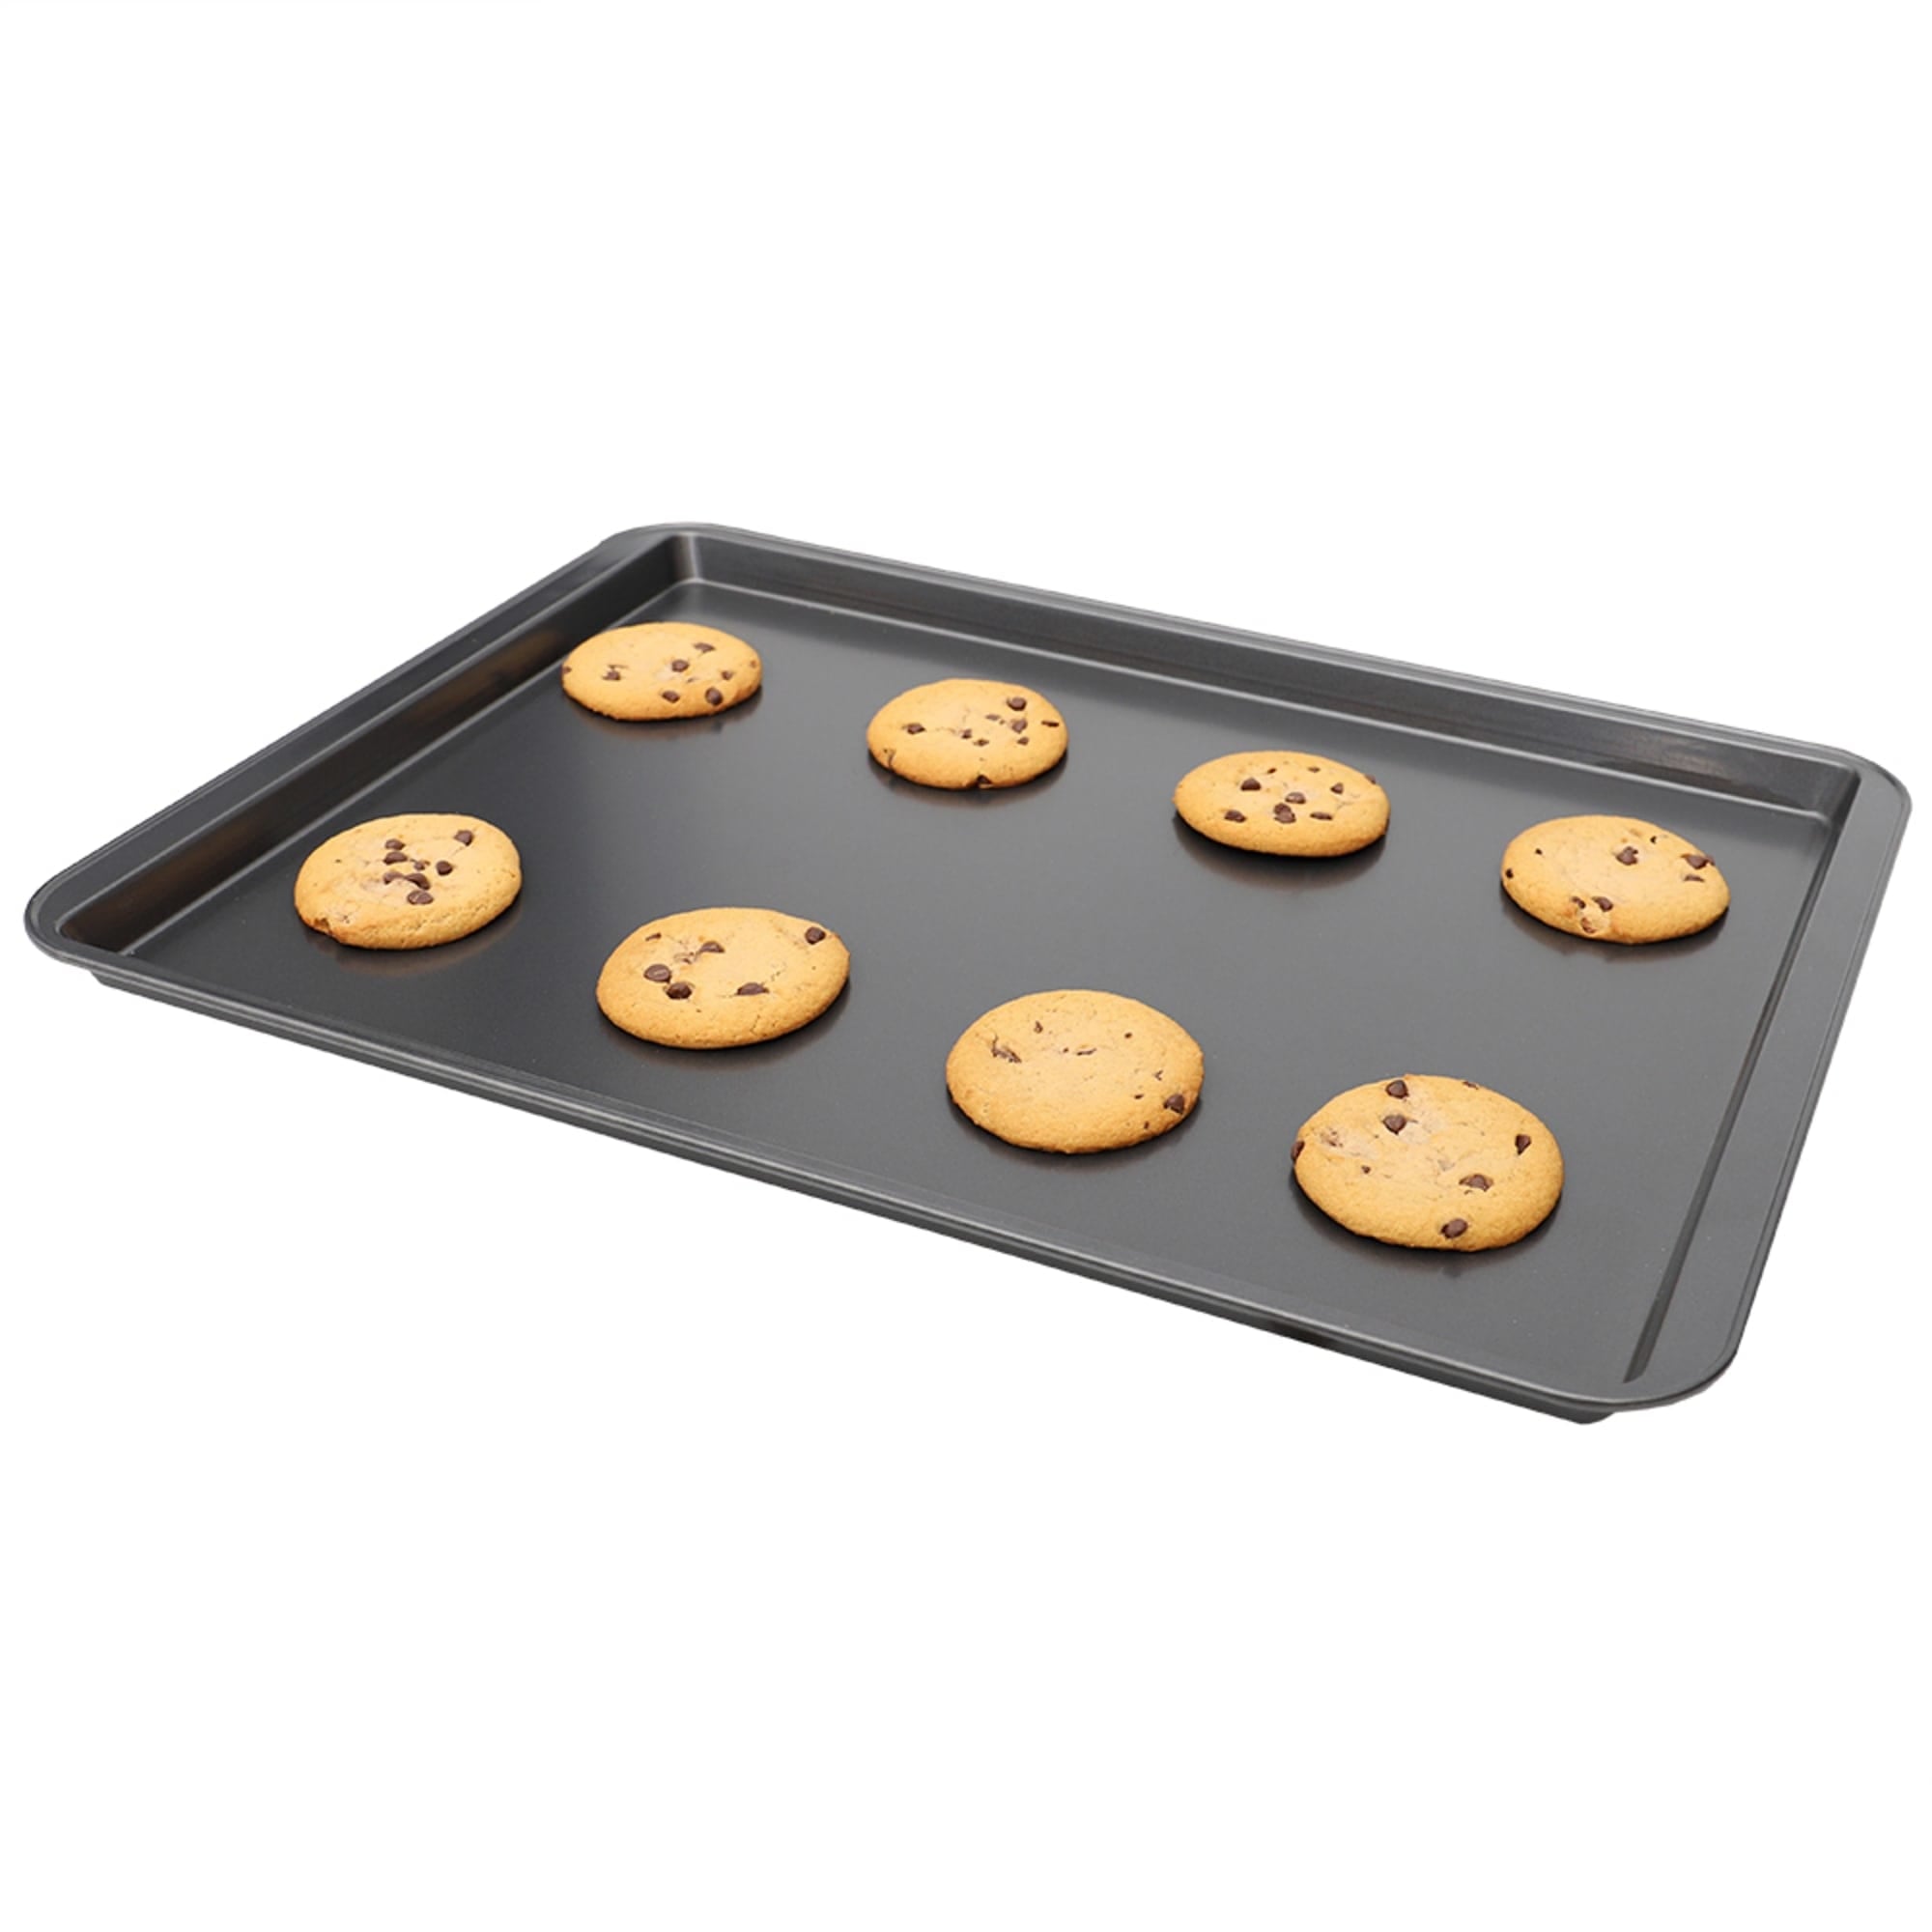 18-Inch Nonstick Baking Sheets & Cookie Trays for Oven, 3-Pack PFOA Free Baking  Pans Set, Black 